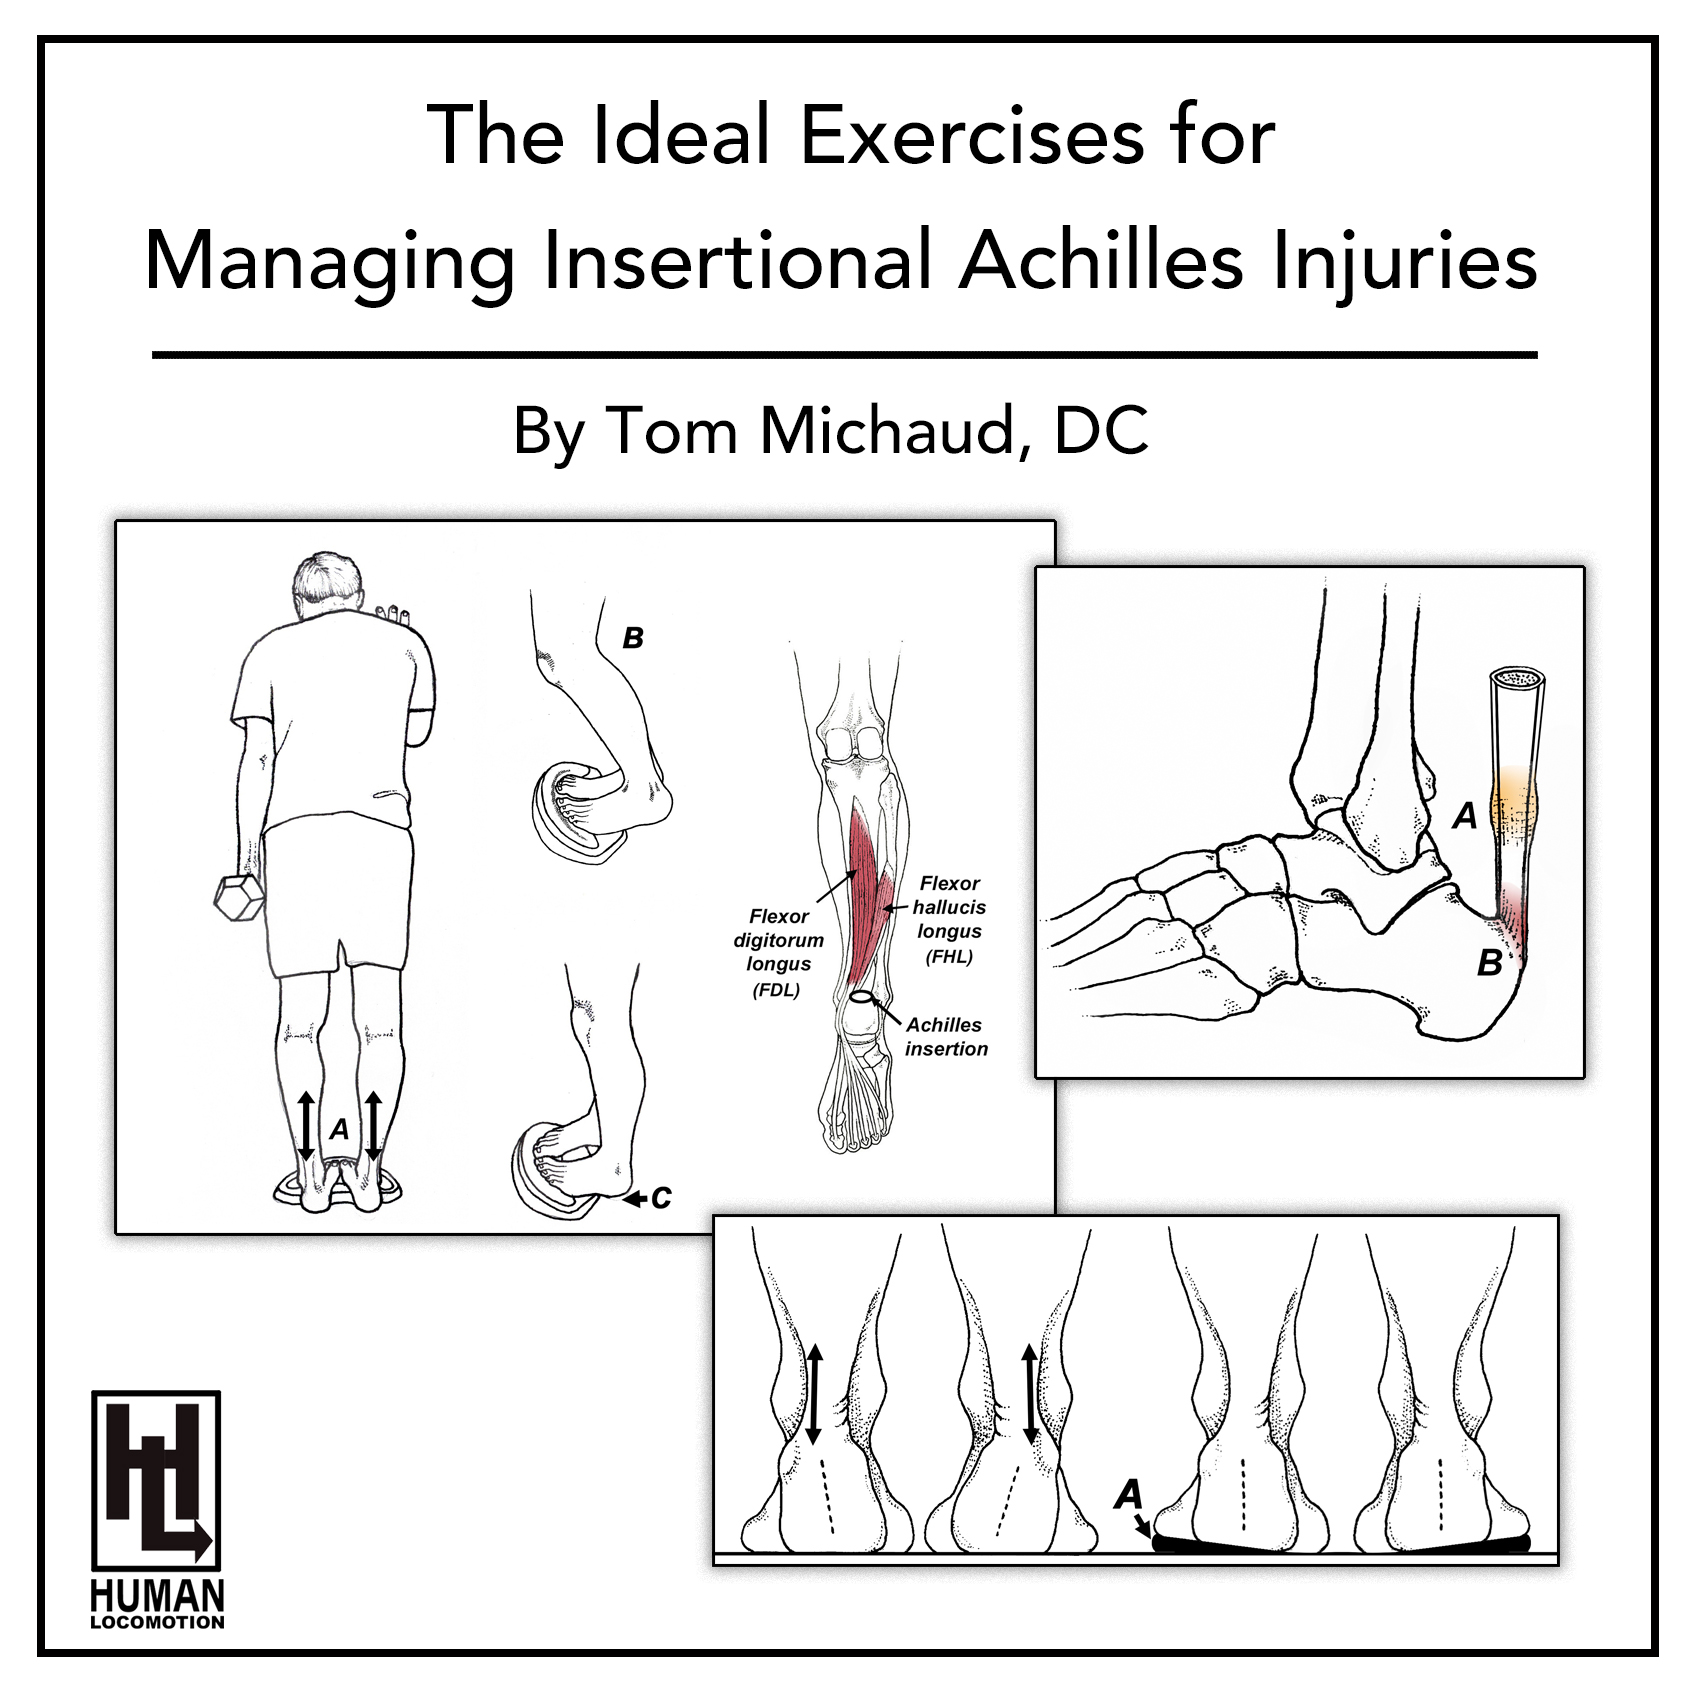 The Ideal Exercises for Managing Insertional Achilles Injuries